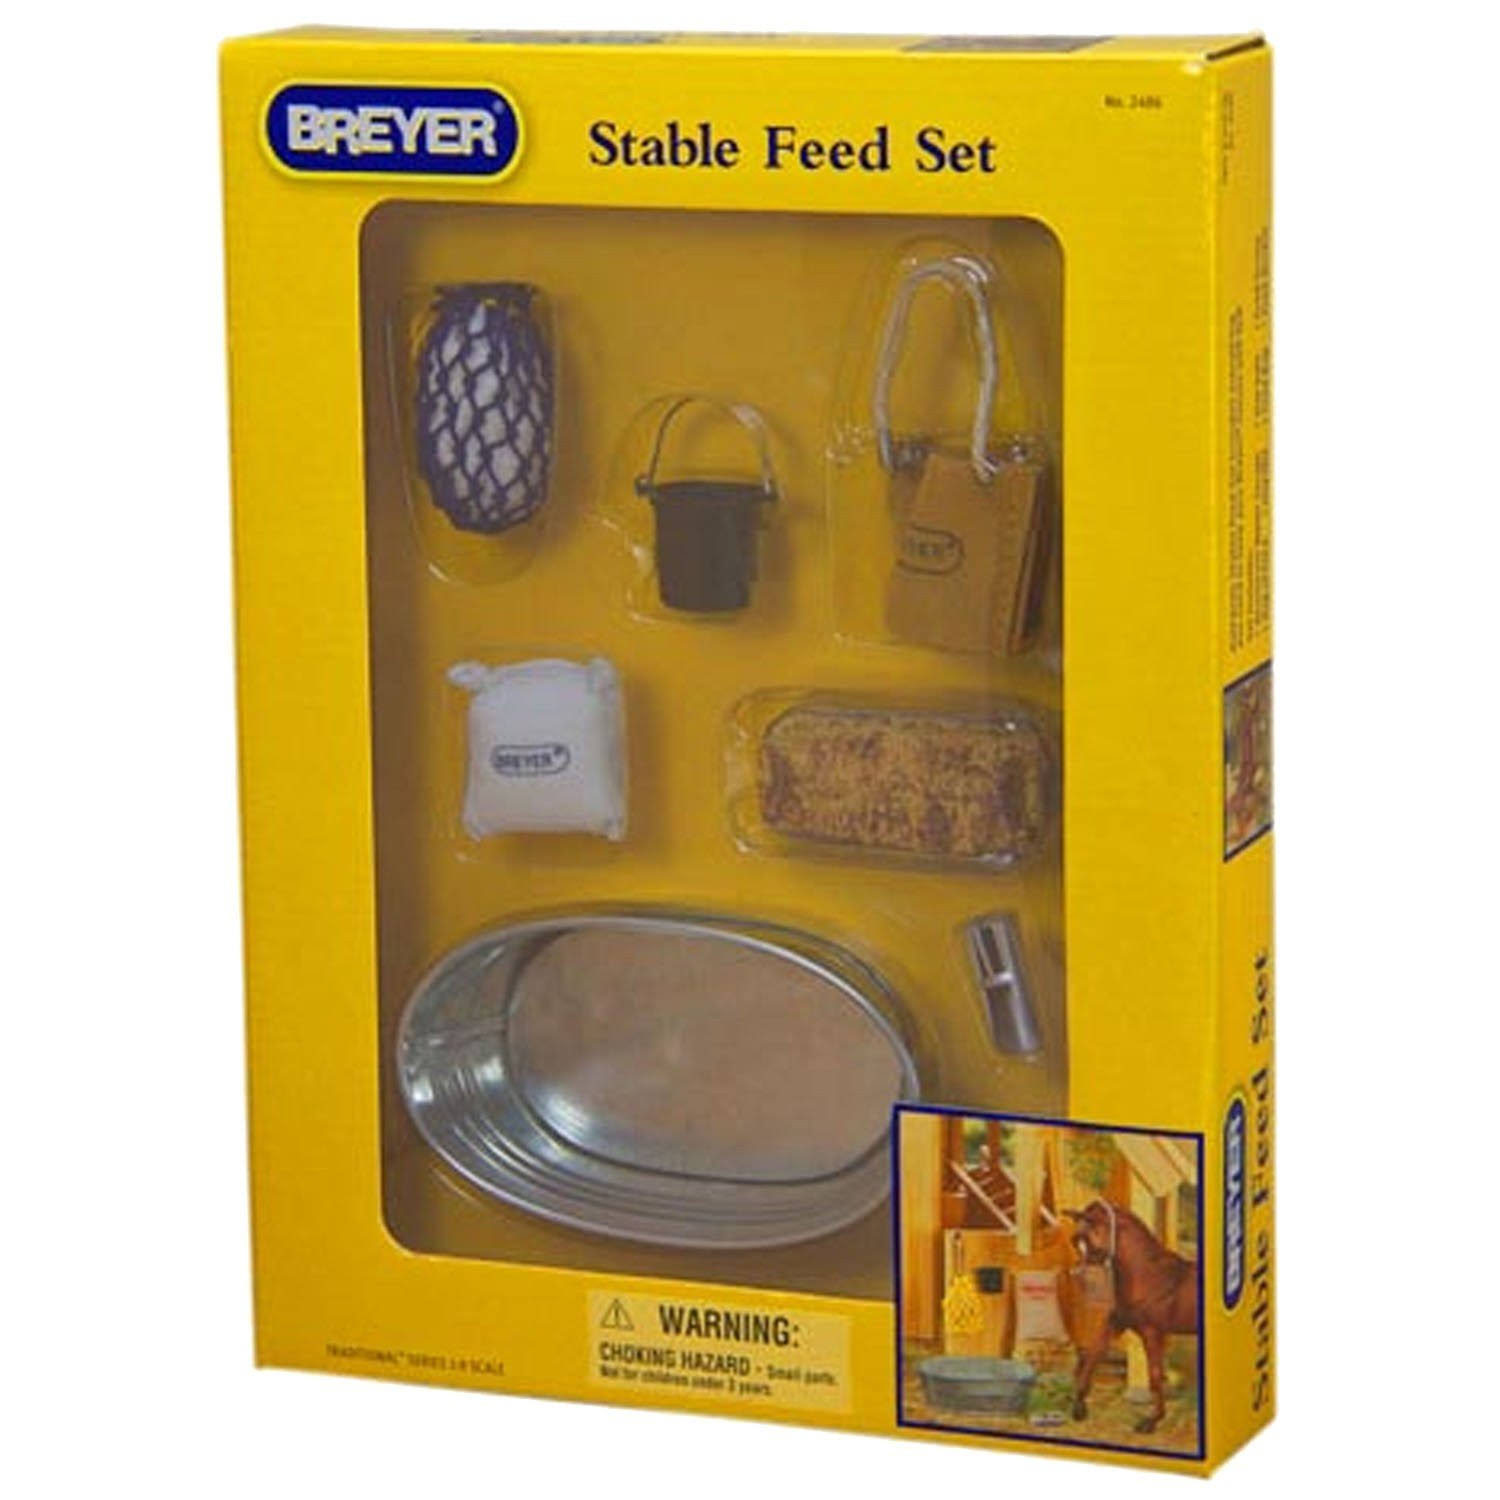 Breyer 2486 Traditional Stable Feed Set